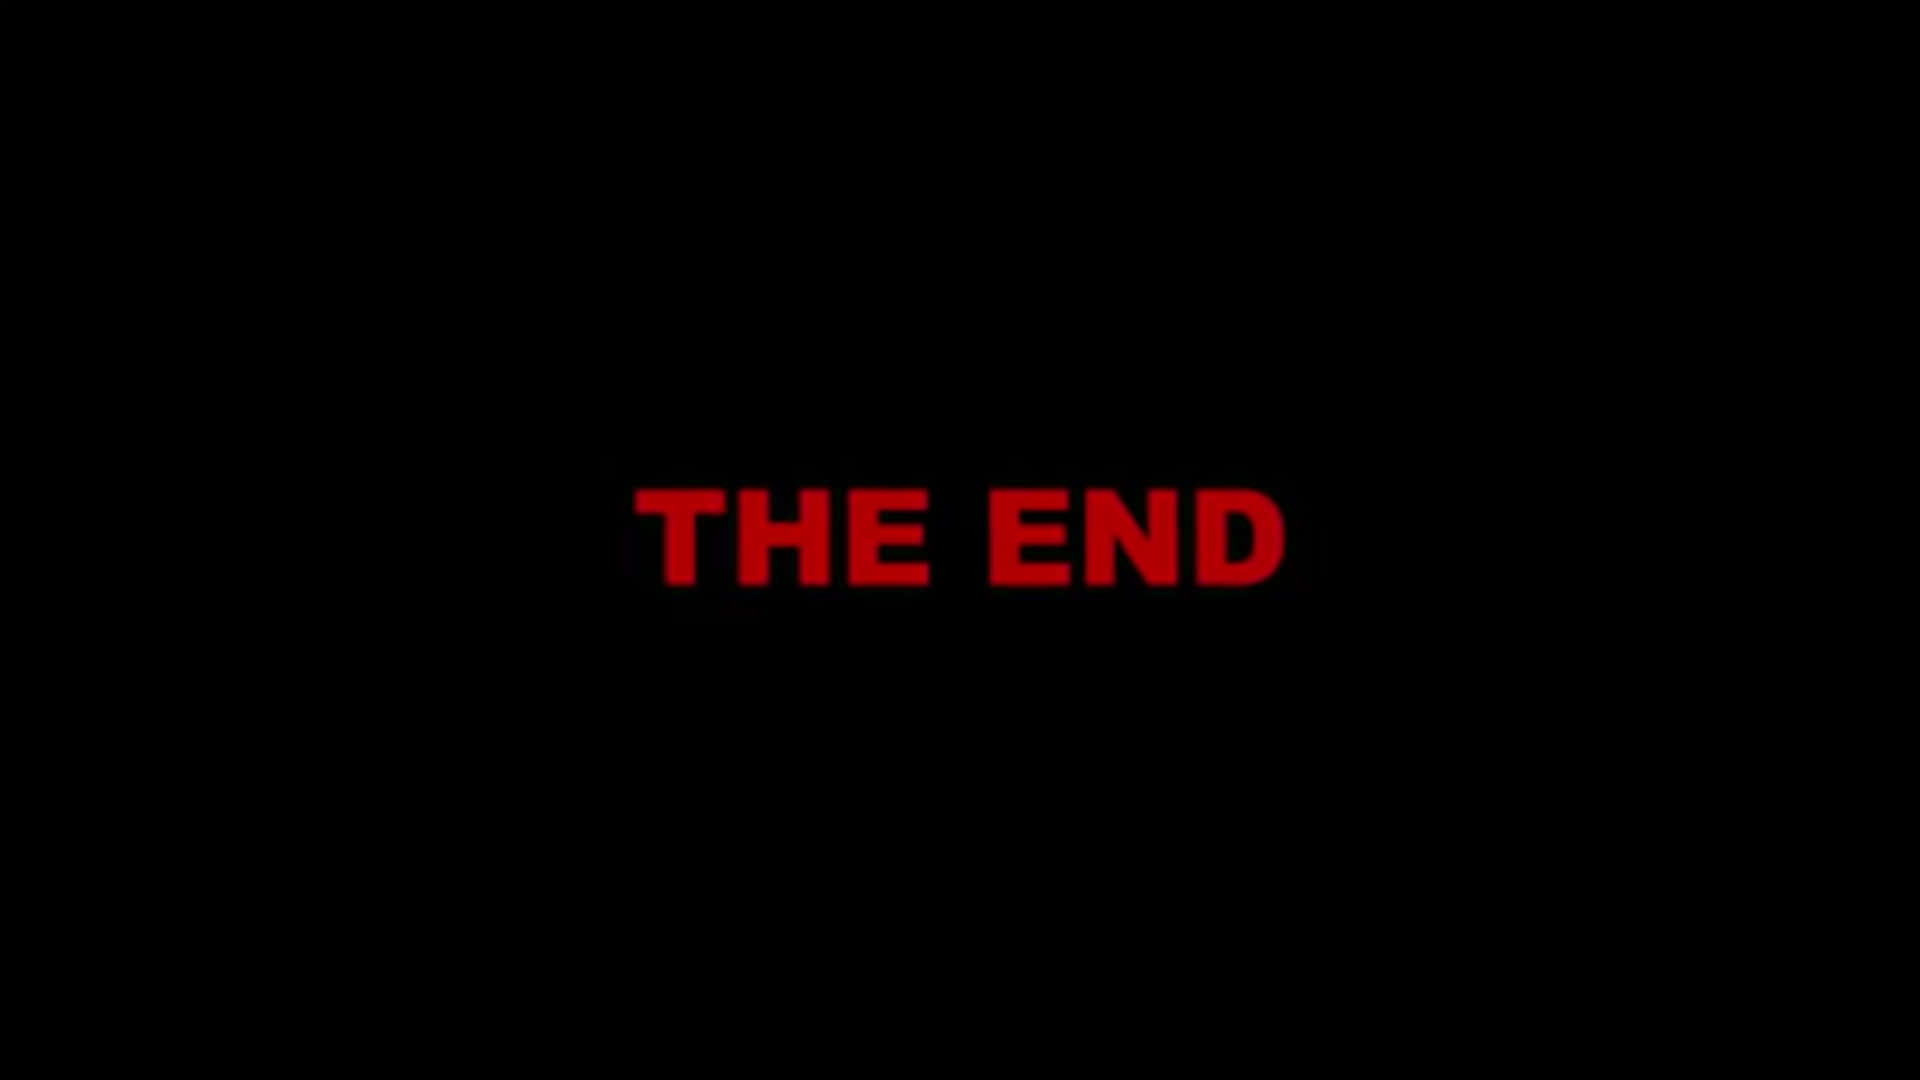 The End 1920 X 1080